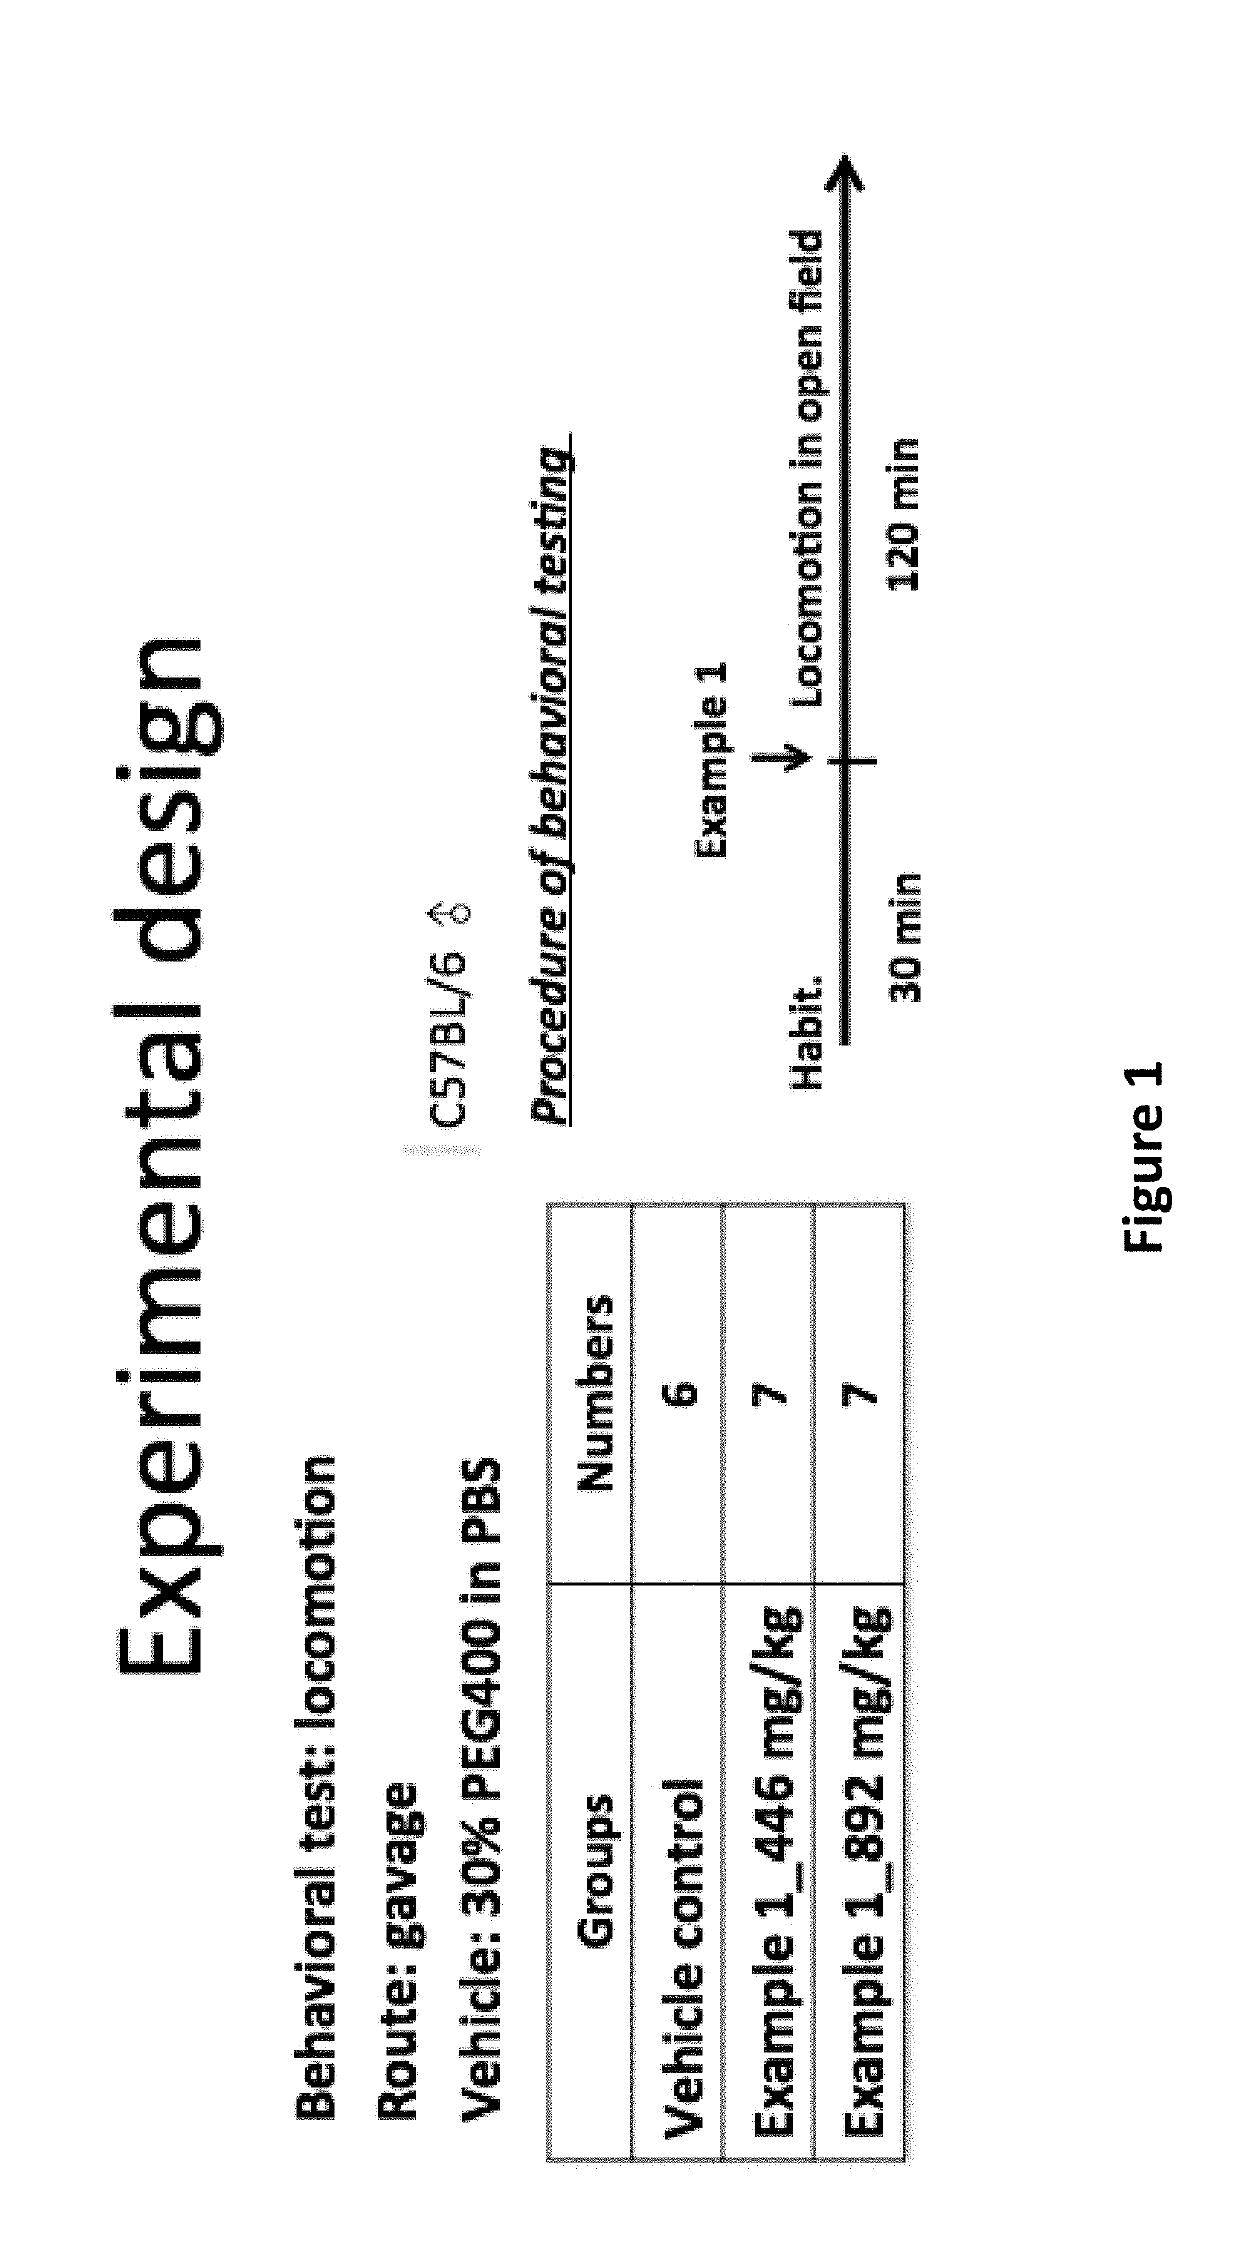 D-amino acid oxidase inhibitors and therapeutic uses thereof